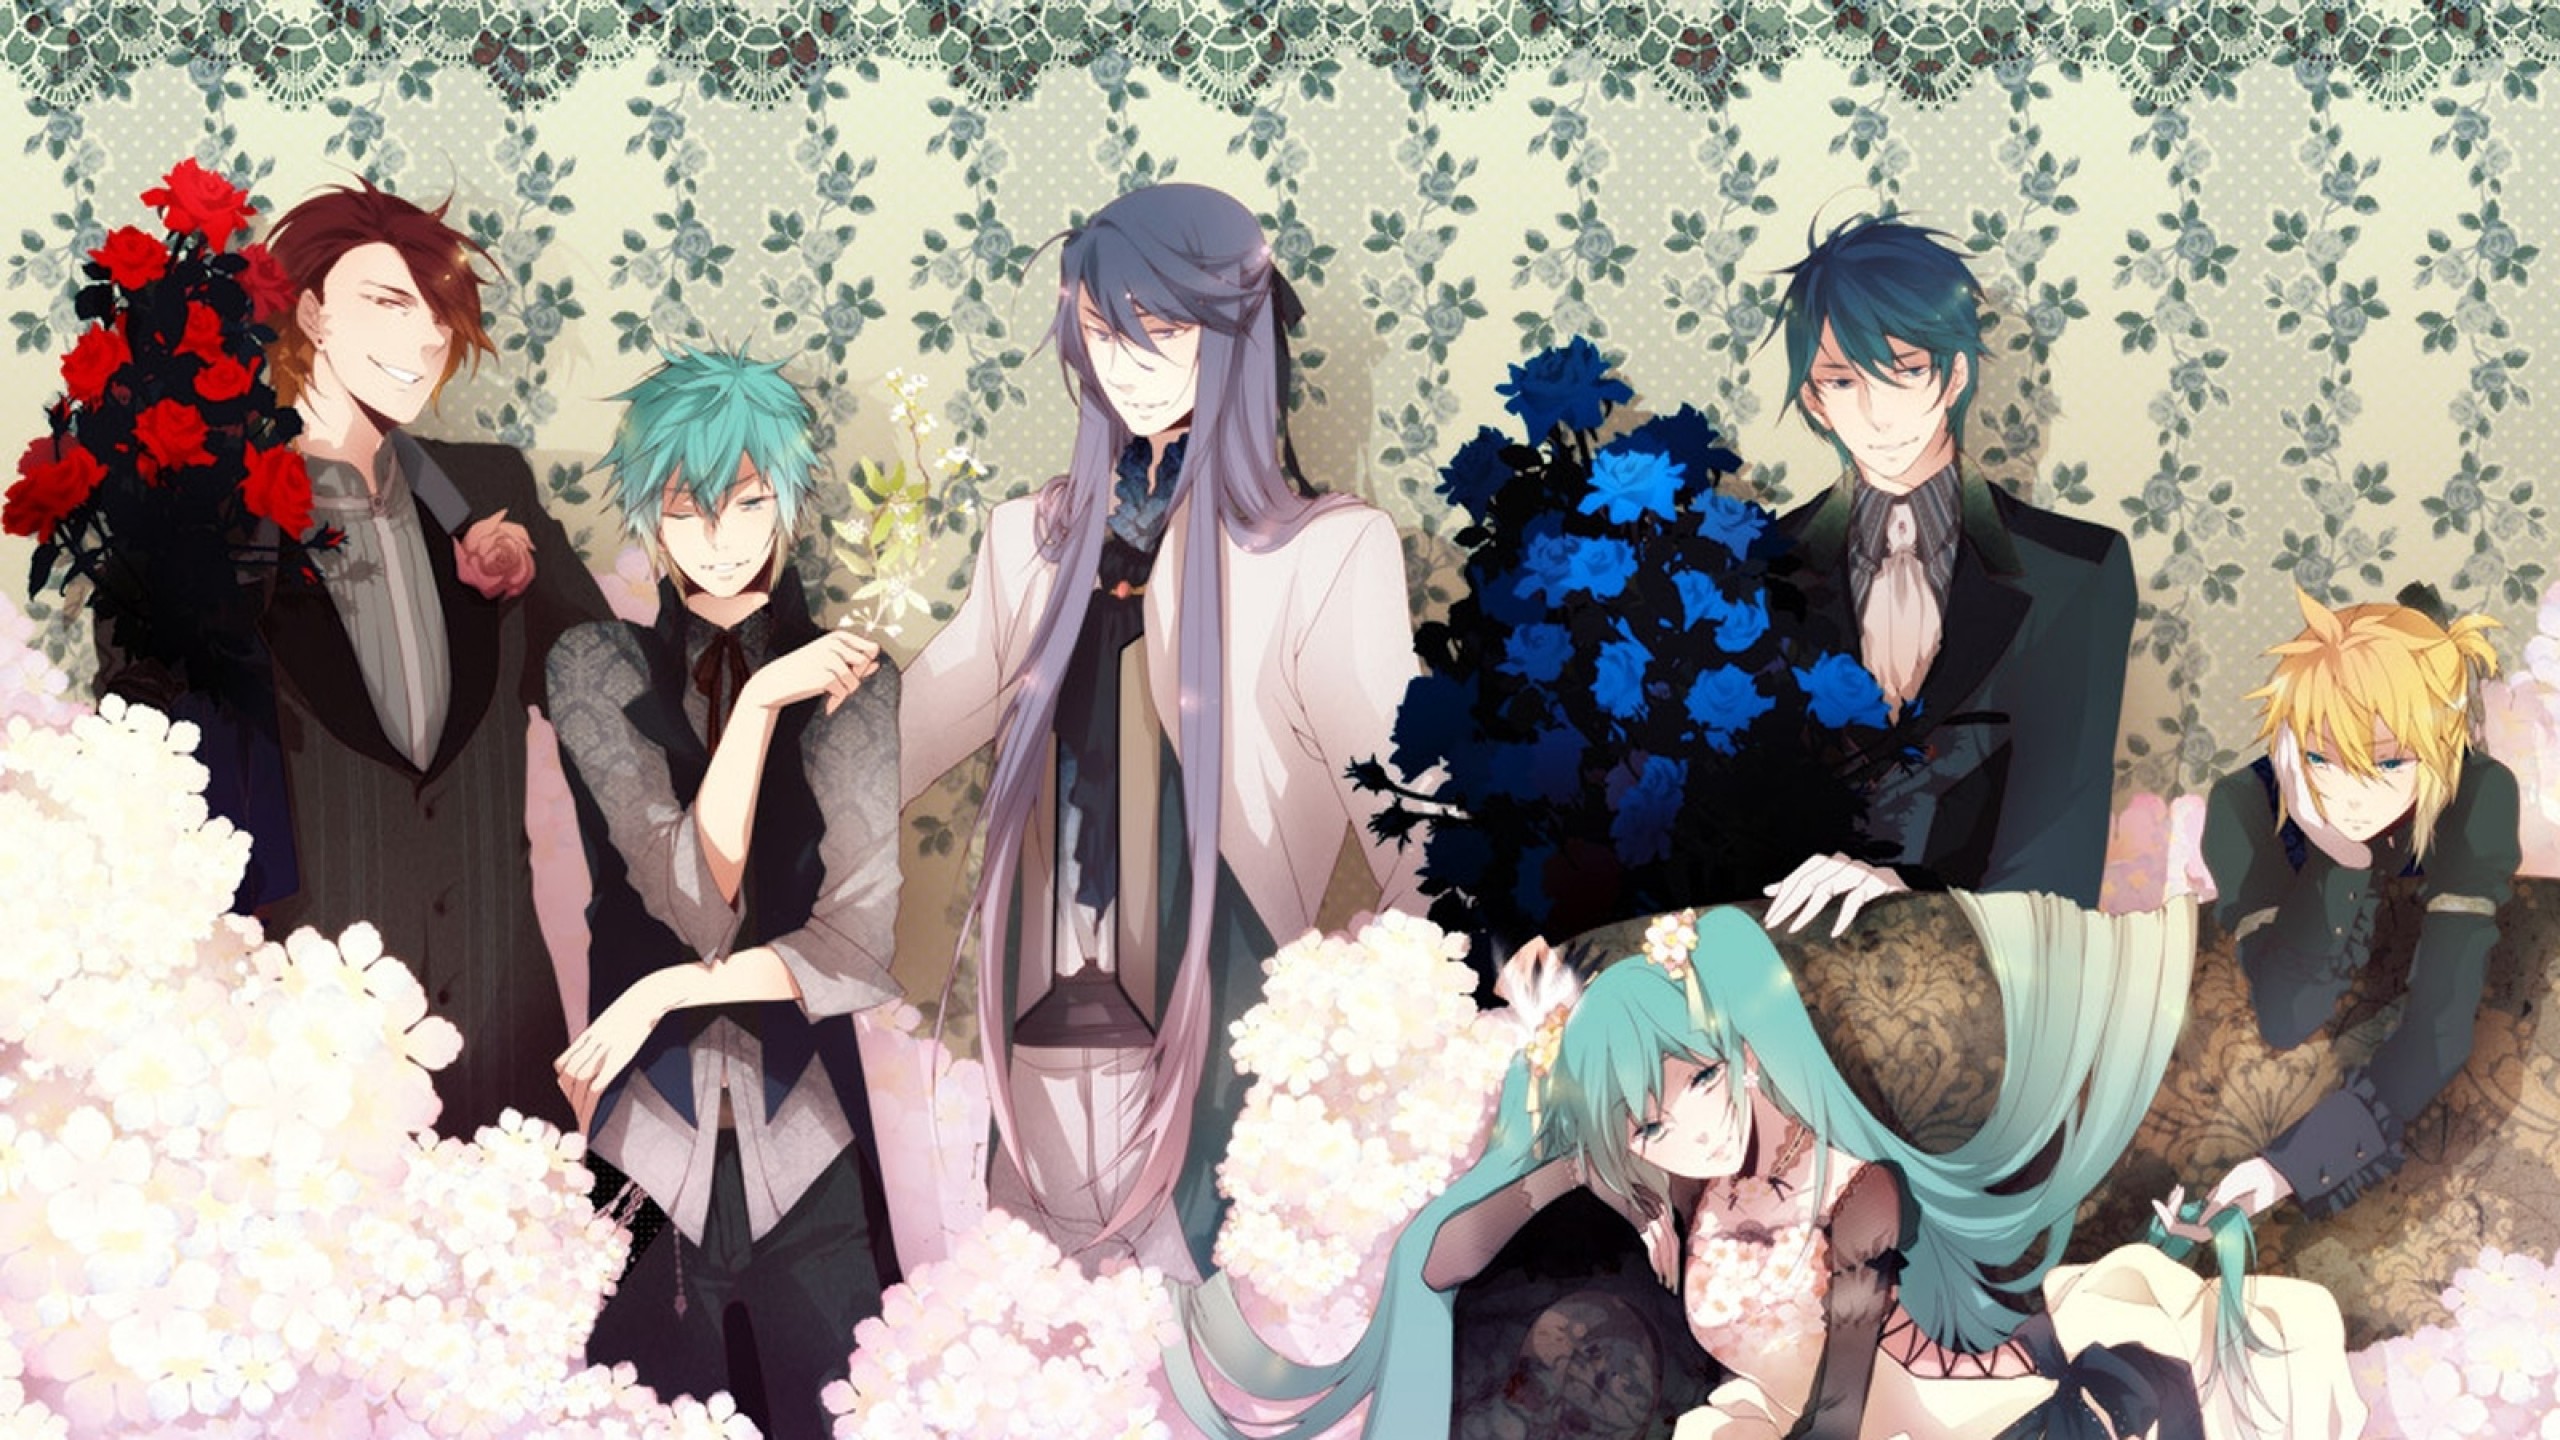 2560x1440 HD Kaito Vocaloid Pictures.